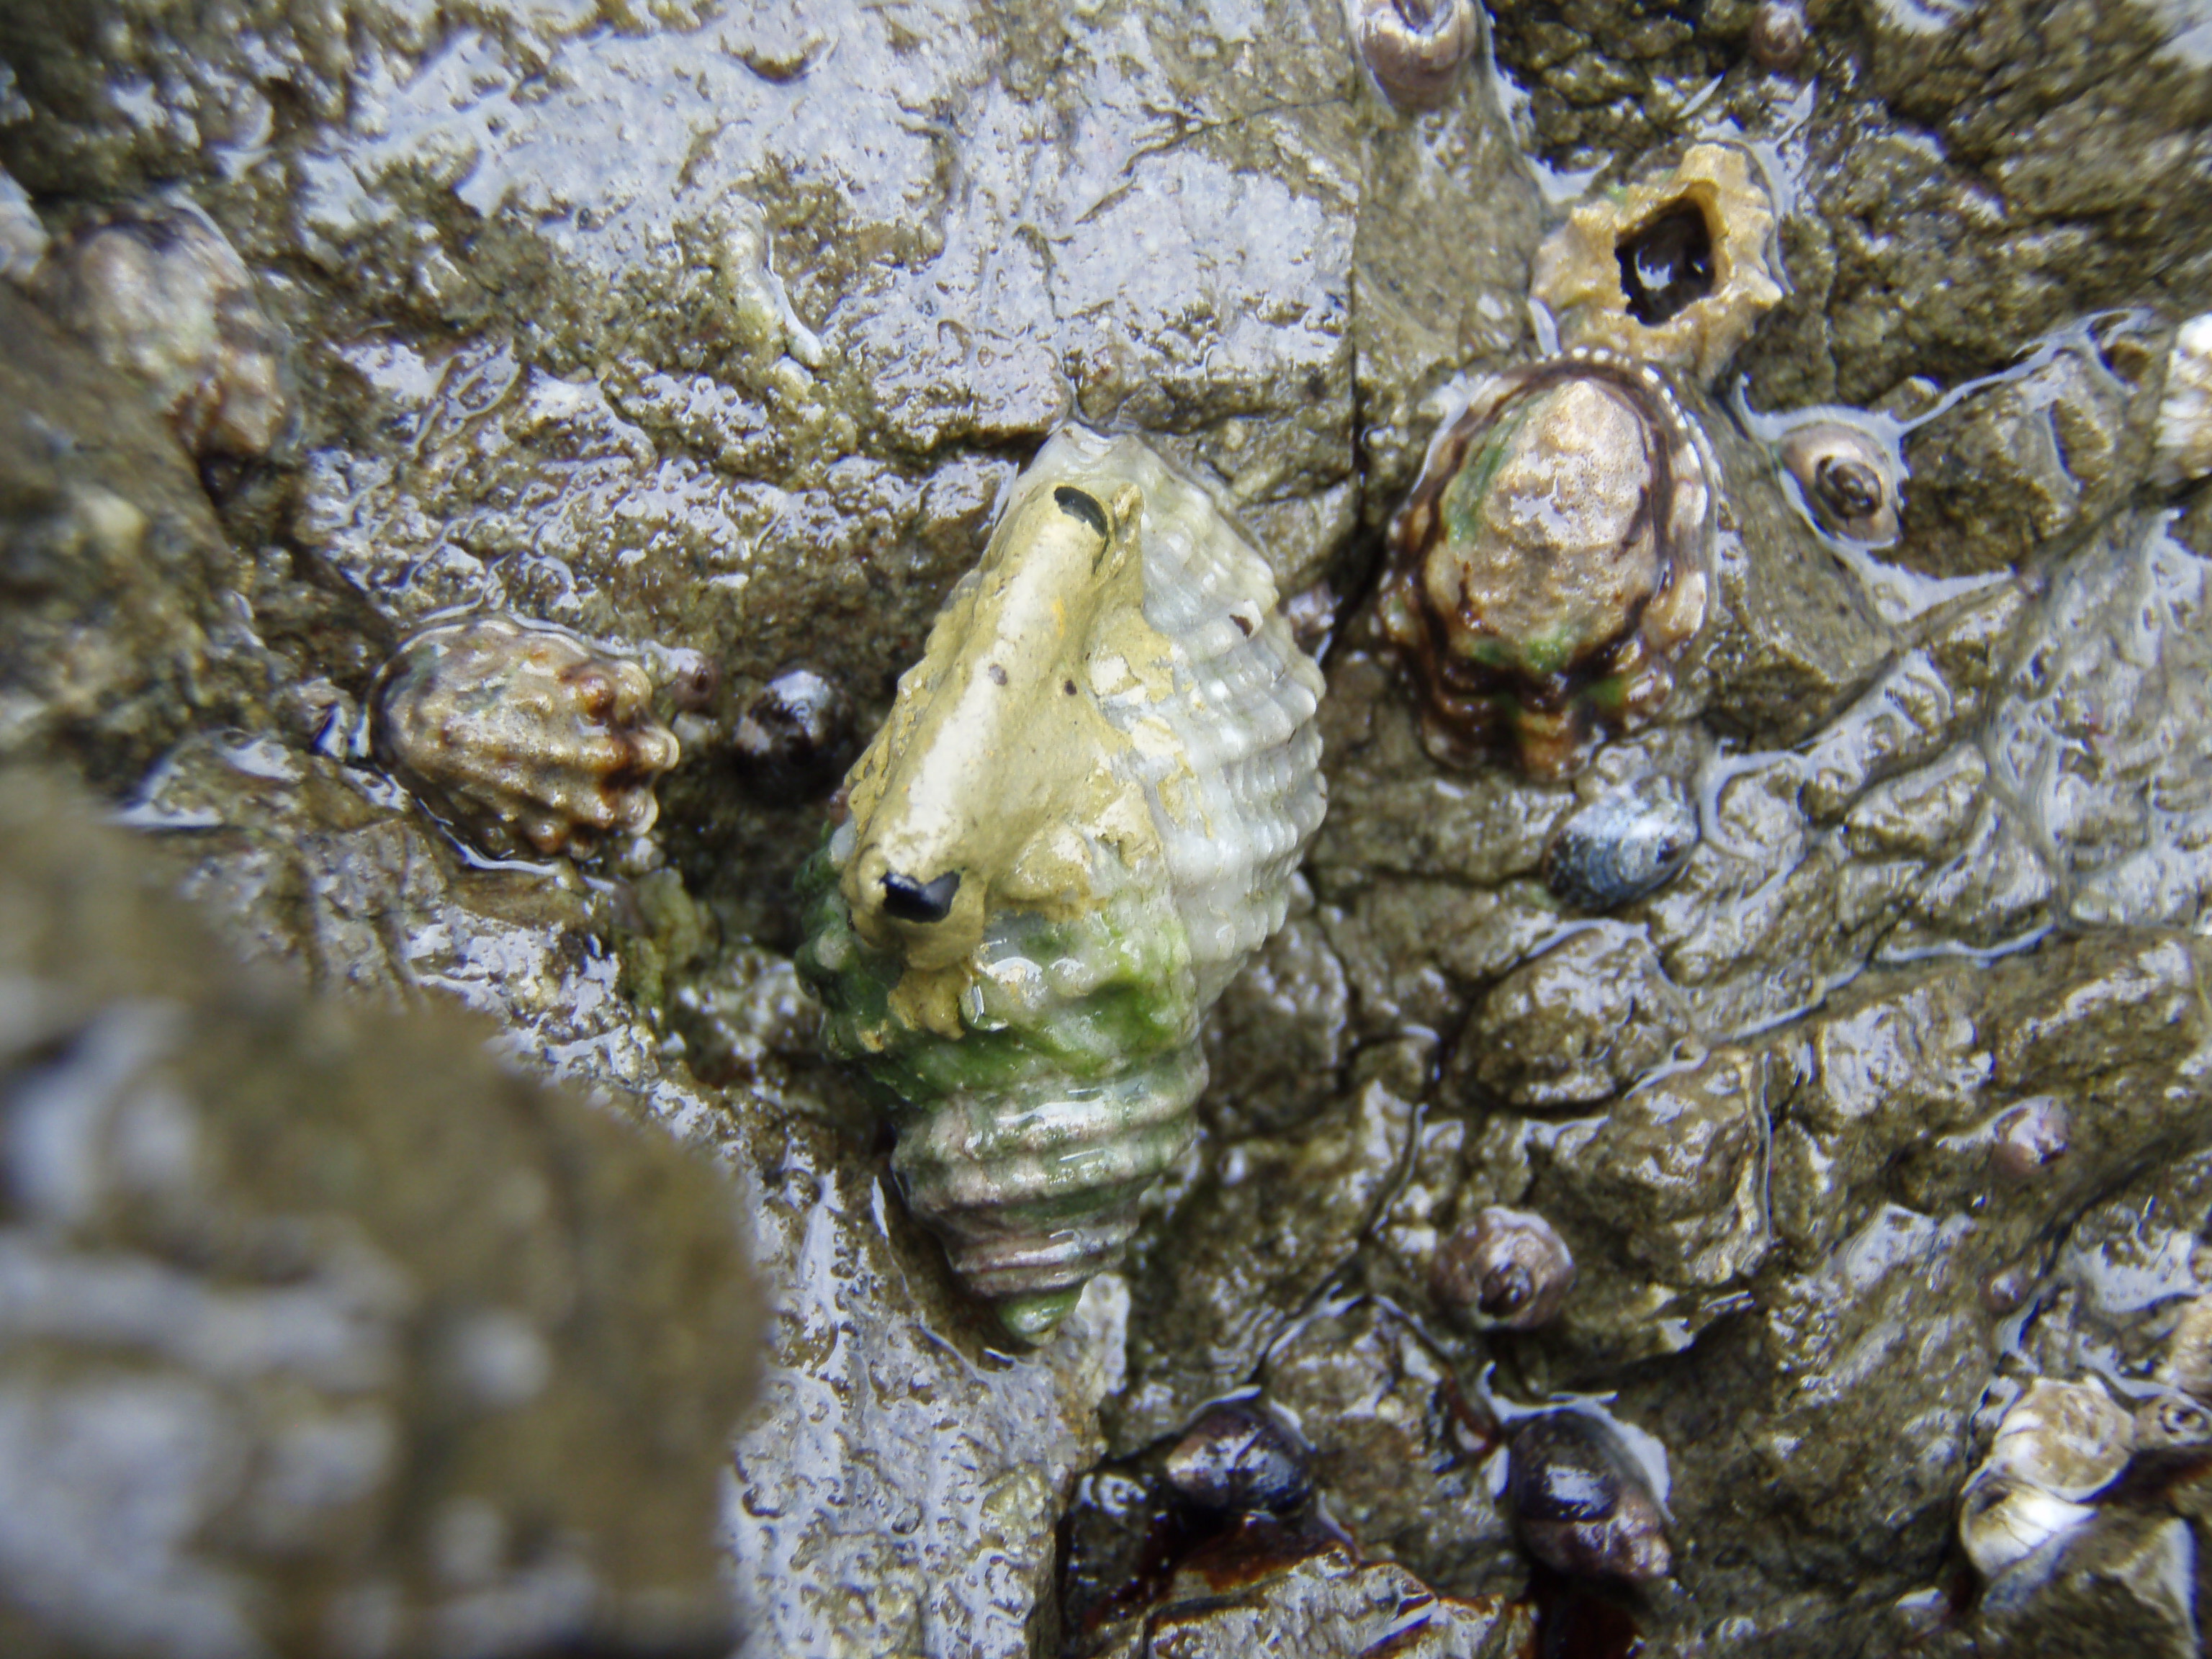 Whelk marine snail with yellow-green epoxy on shell sitting on wet rock with other small invertebrates. The epoxy holds on a small glass tag that rebounds radio frequency so that the snail can be tracked.